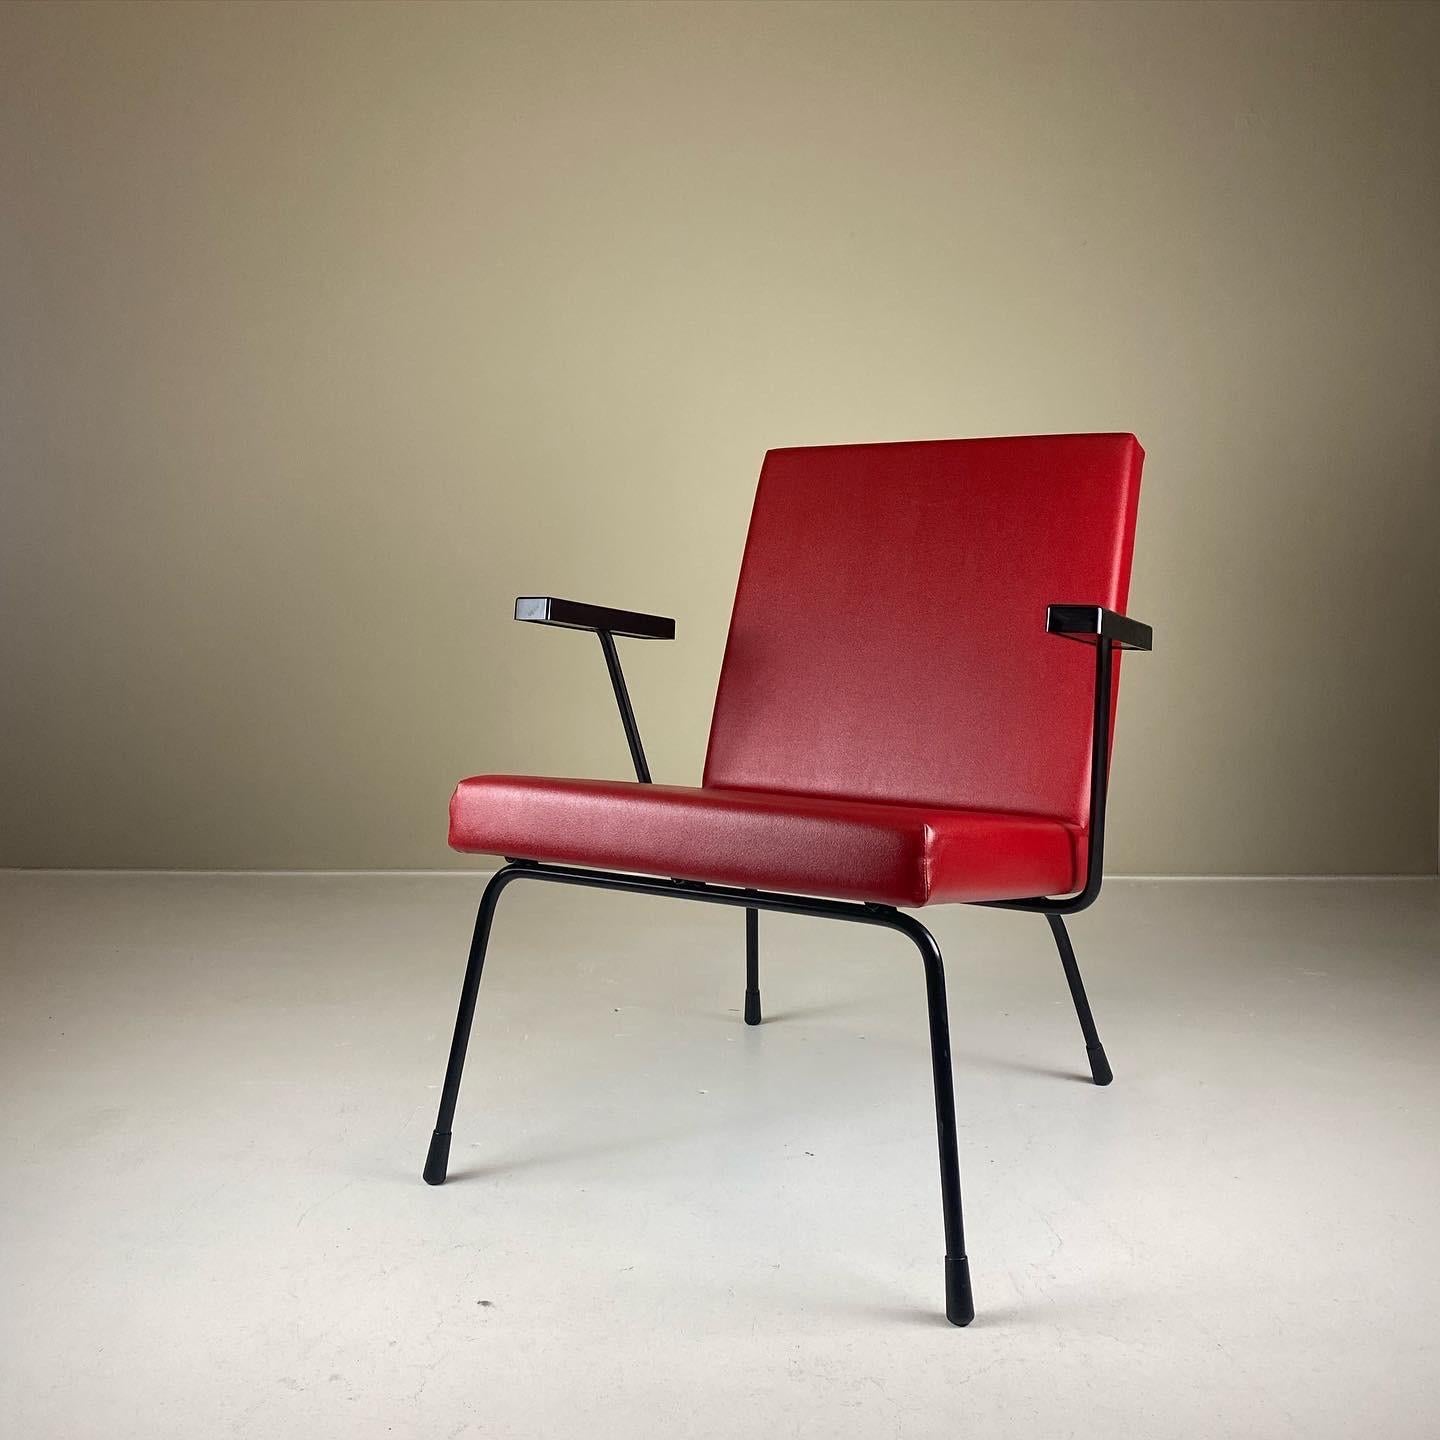 Steel Set of 2 Gispen 1407 Armchairs in Vinyl by Wim Rietveld & Andre Cordemeyer For Sale